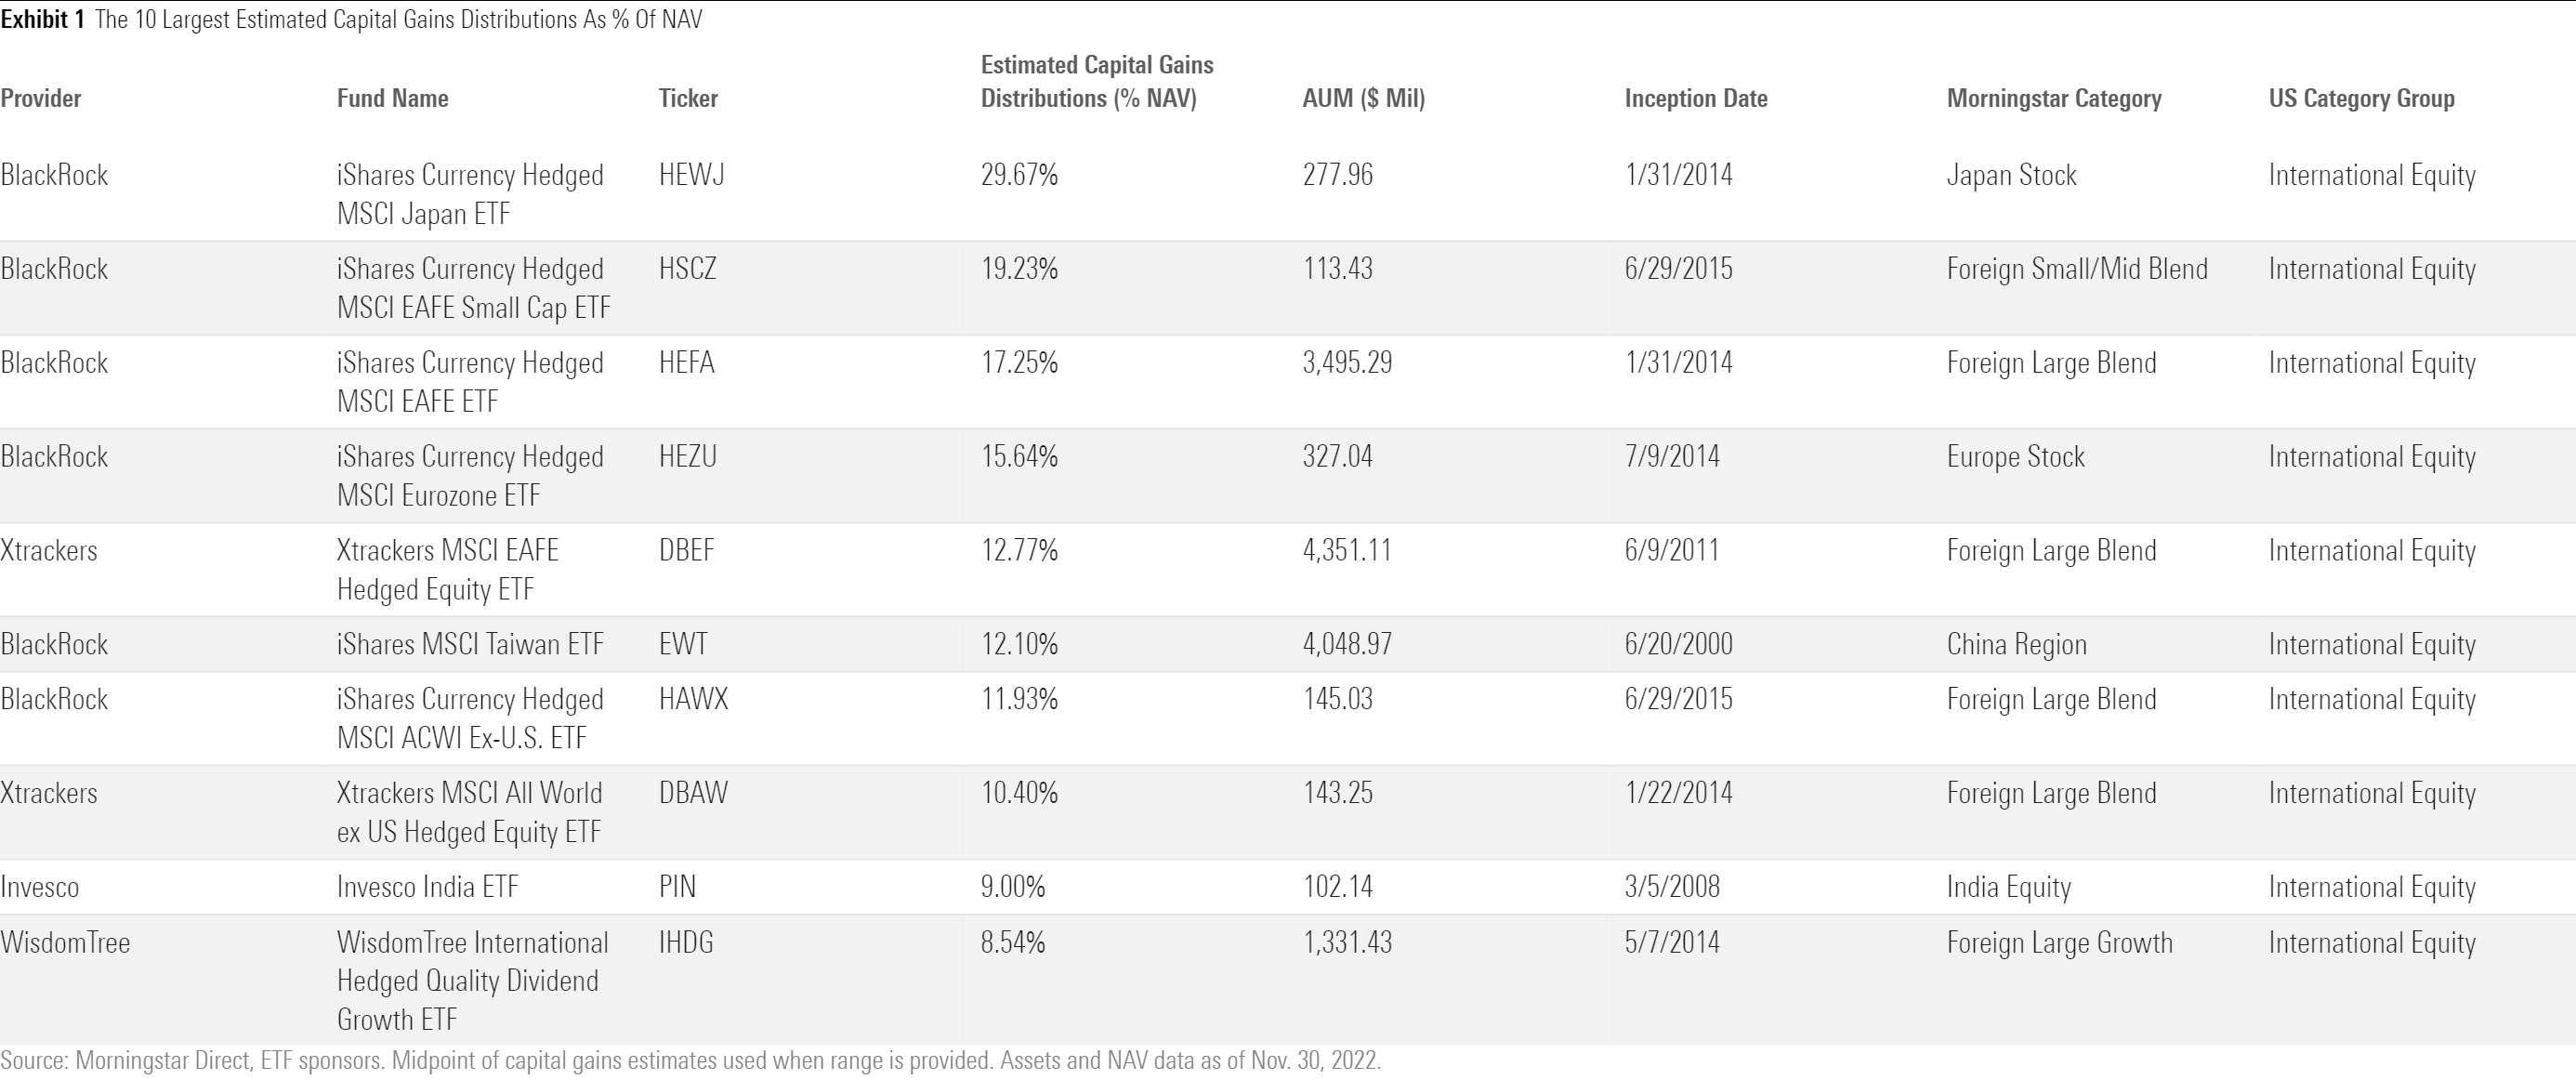 A table of the 10 ETFs with the largest estimated capital gains distributions as a percentage of their net asset values.